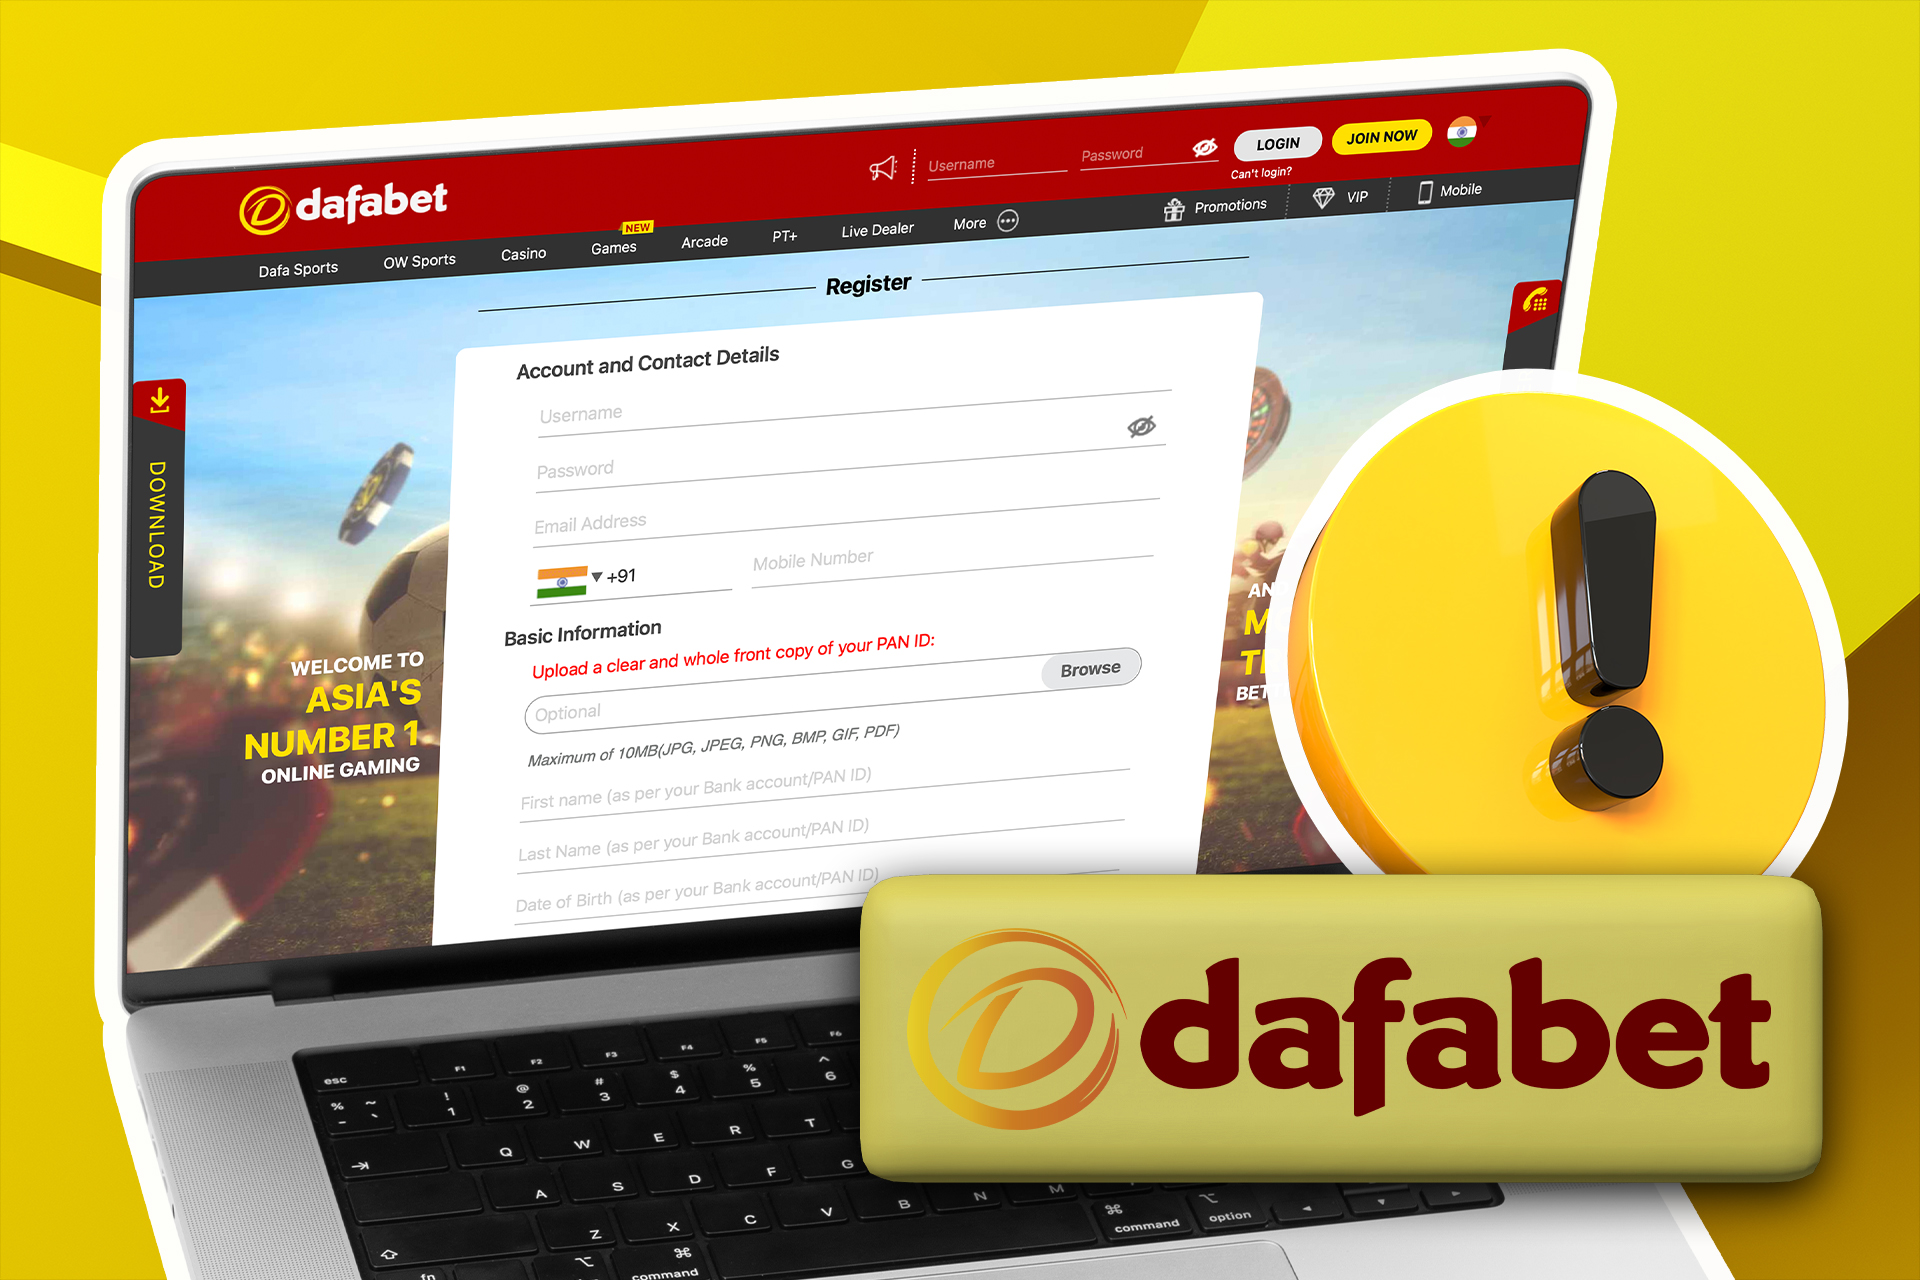 Only users over 18 years old can have an account on Dafabet.